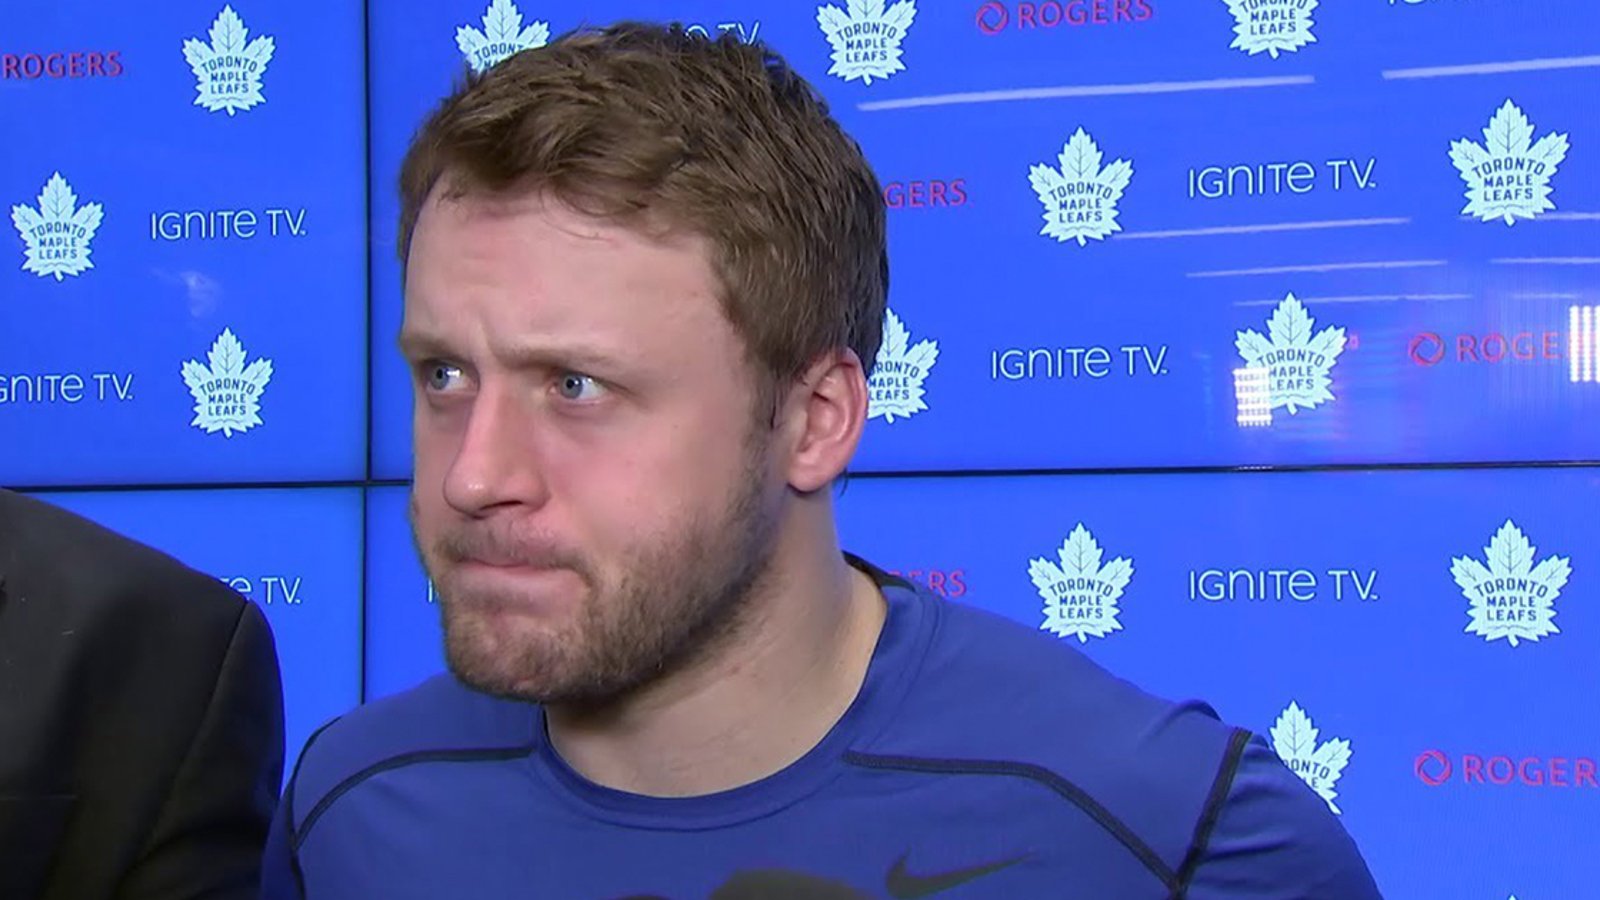 Leafs release official statement after Morgan Rielly is accused of calling referee a “f*cking f*ggot“